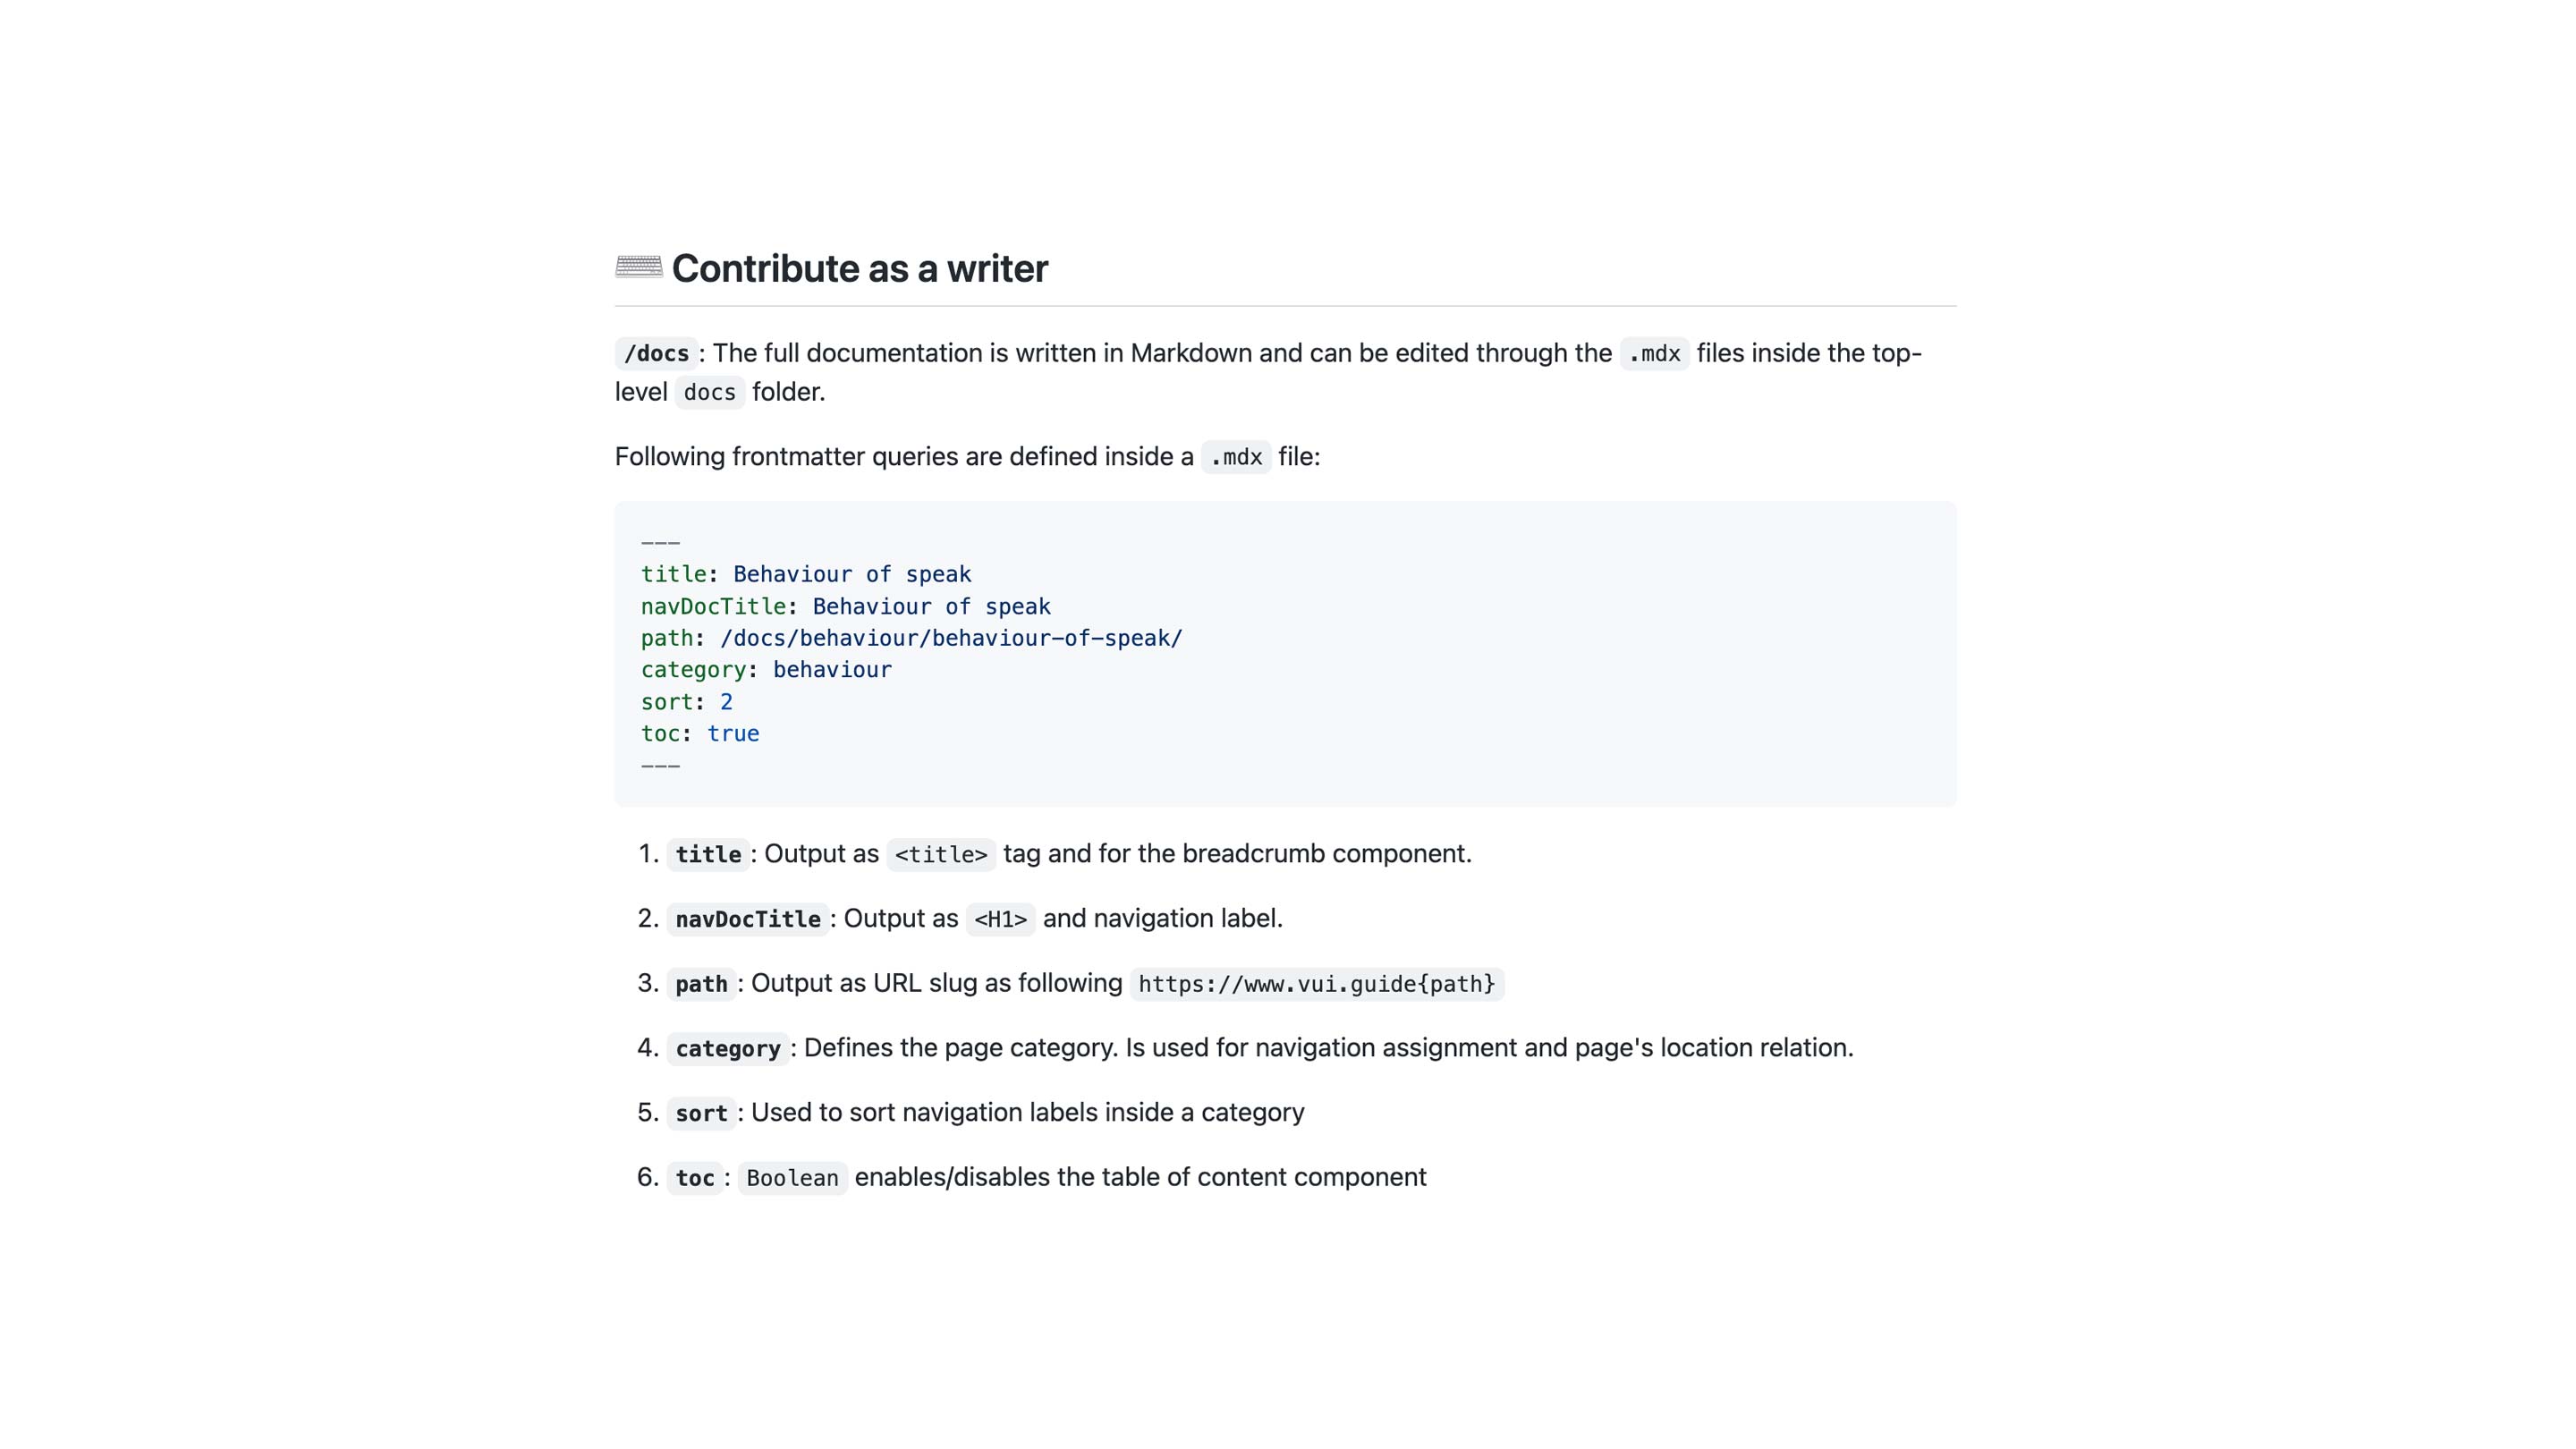 Excerpt from the Github documentation on how to contribute to VUI Guide.